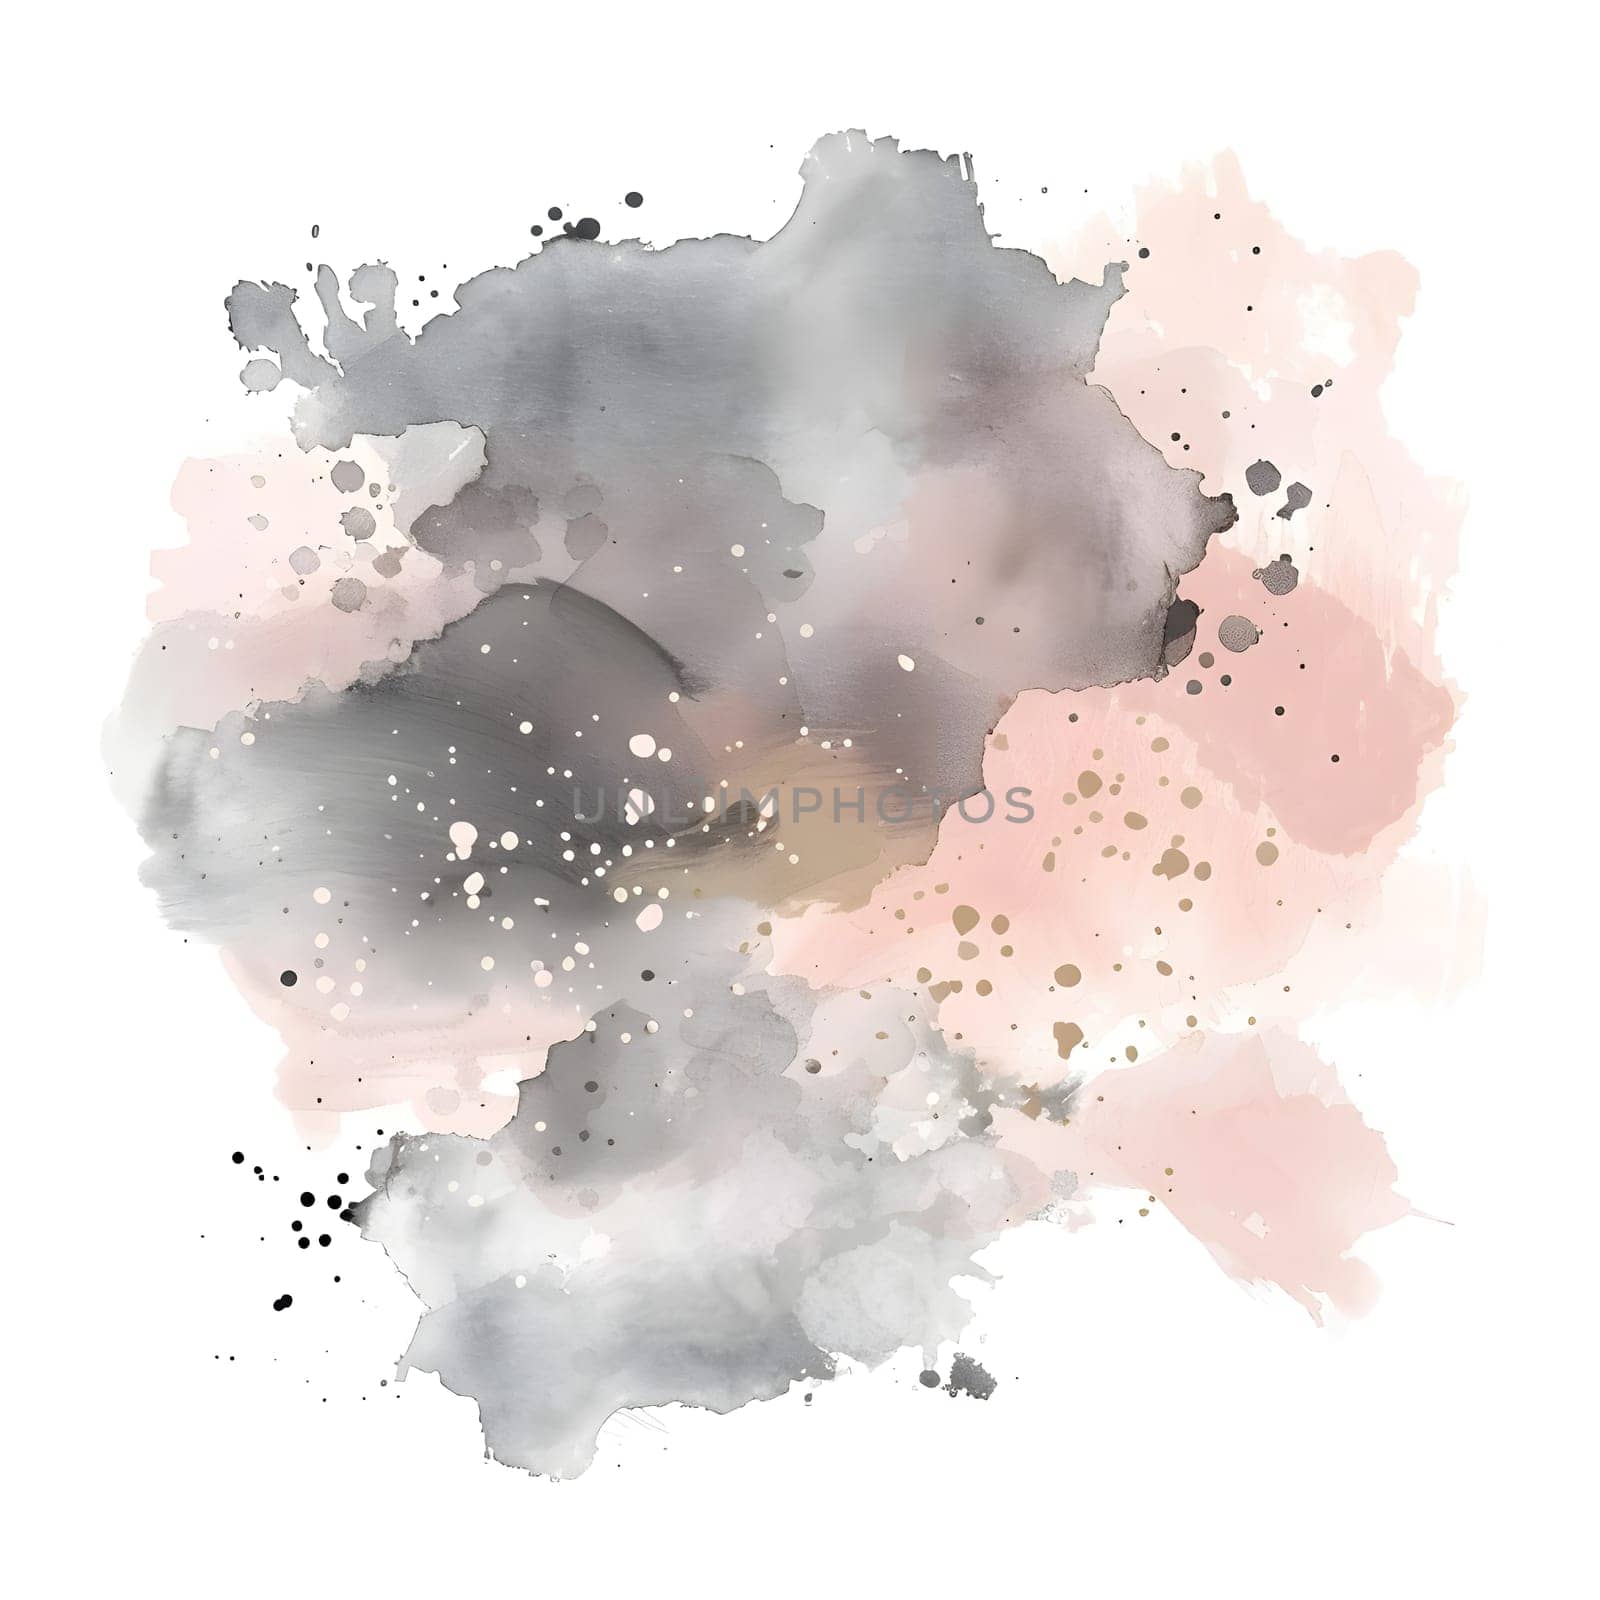 A beautiful gray and pink watercolor splash on a white background, resembling a cloud over a landscape. The art event features a soft font, creating a calming and peaceful atmosphere